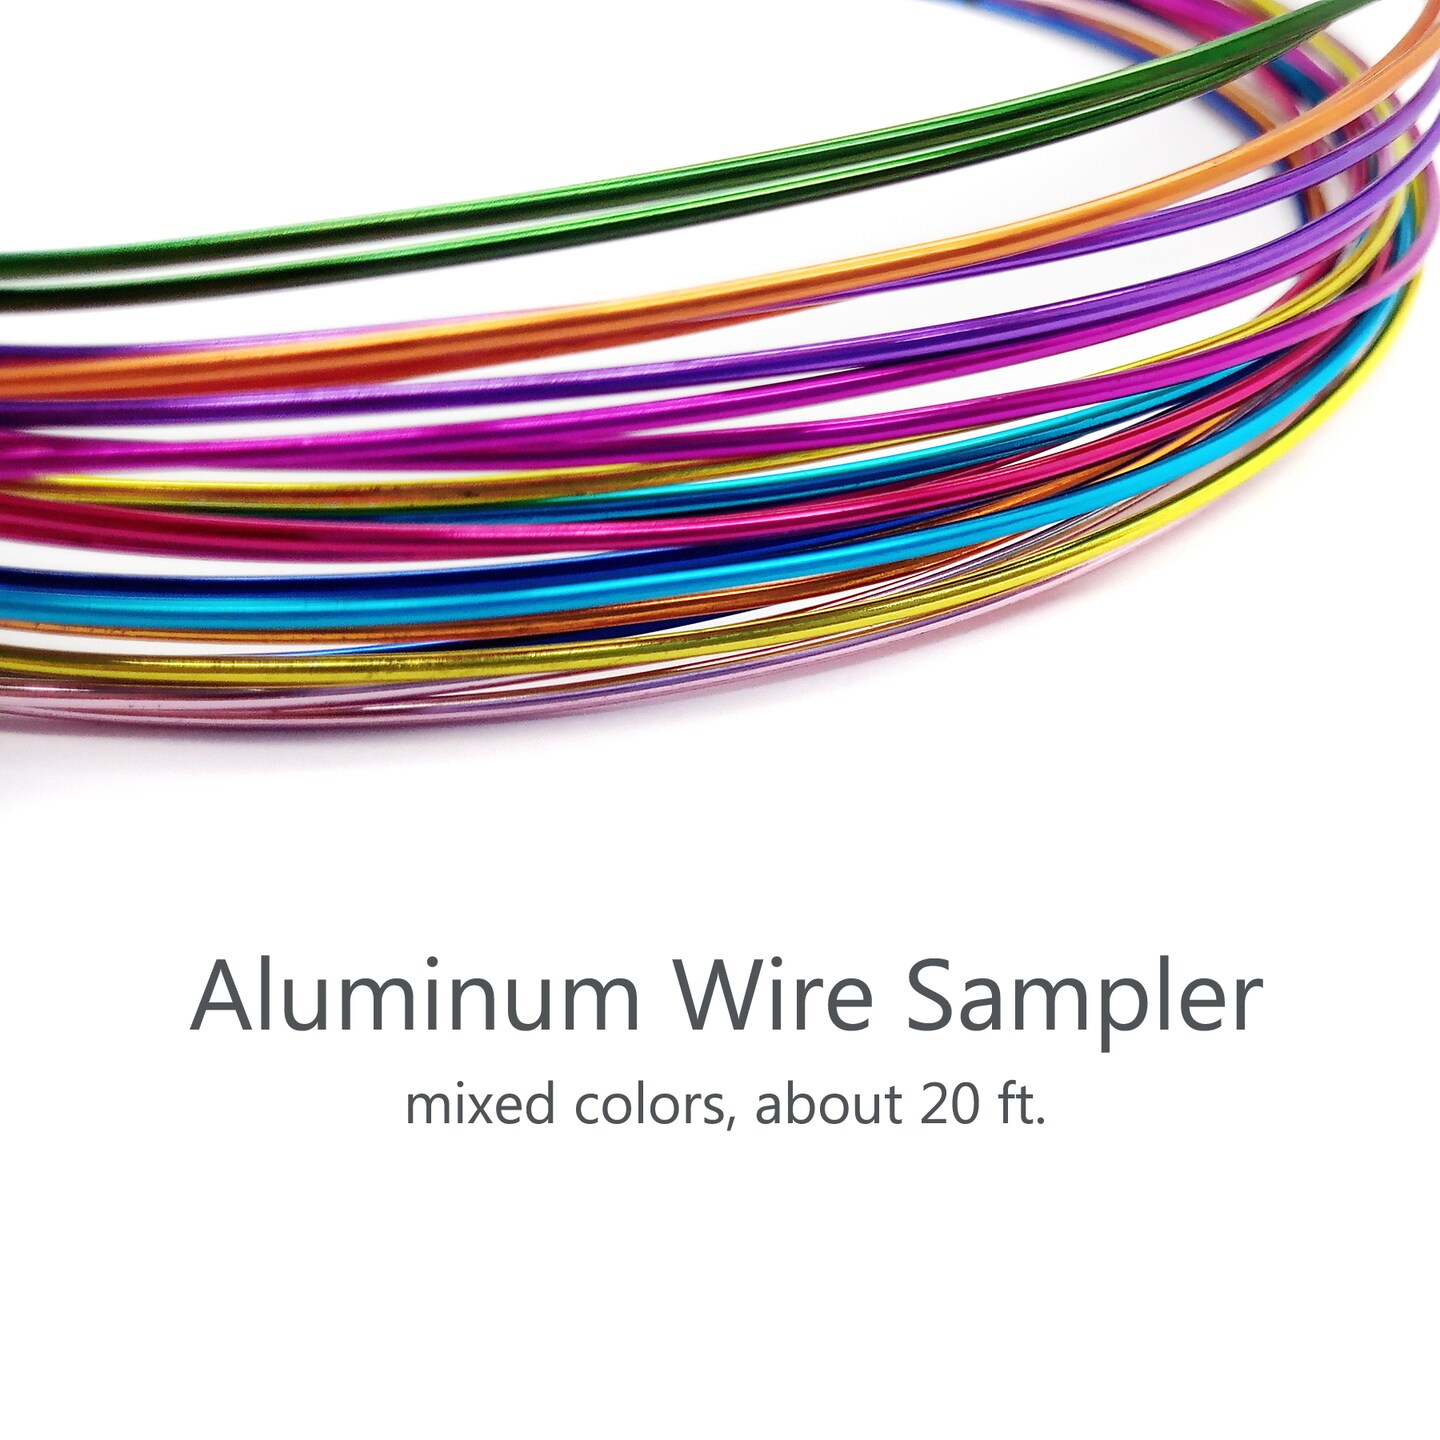 Aluminum Wire Sampler, Mixed Colors, 18 gauge, 1mm wide, about 20 ft, Adorabilities